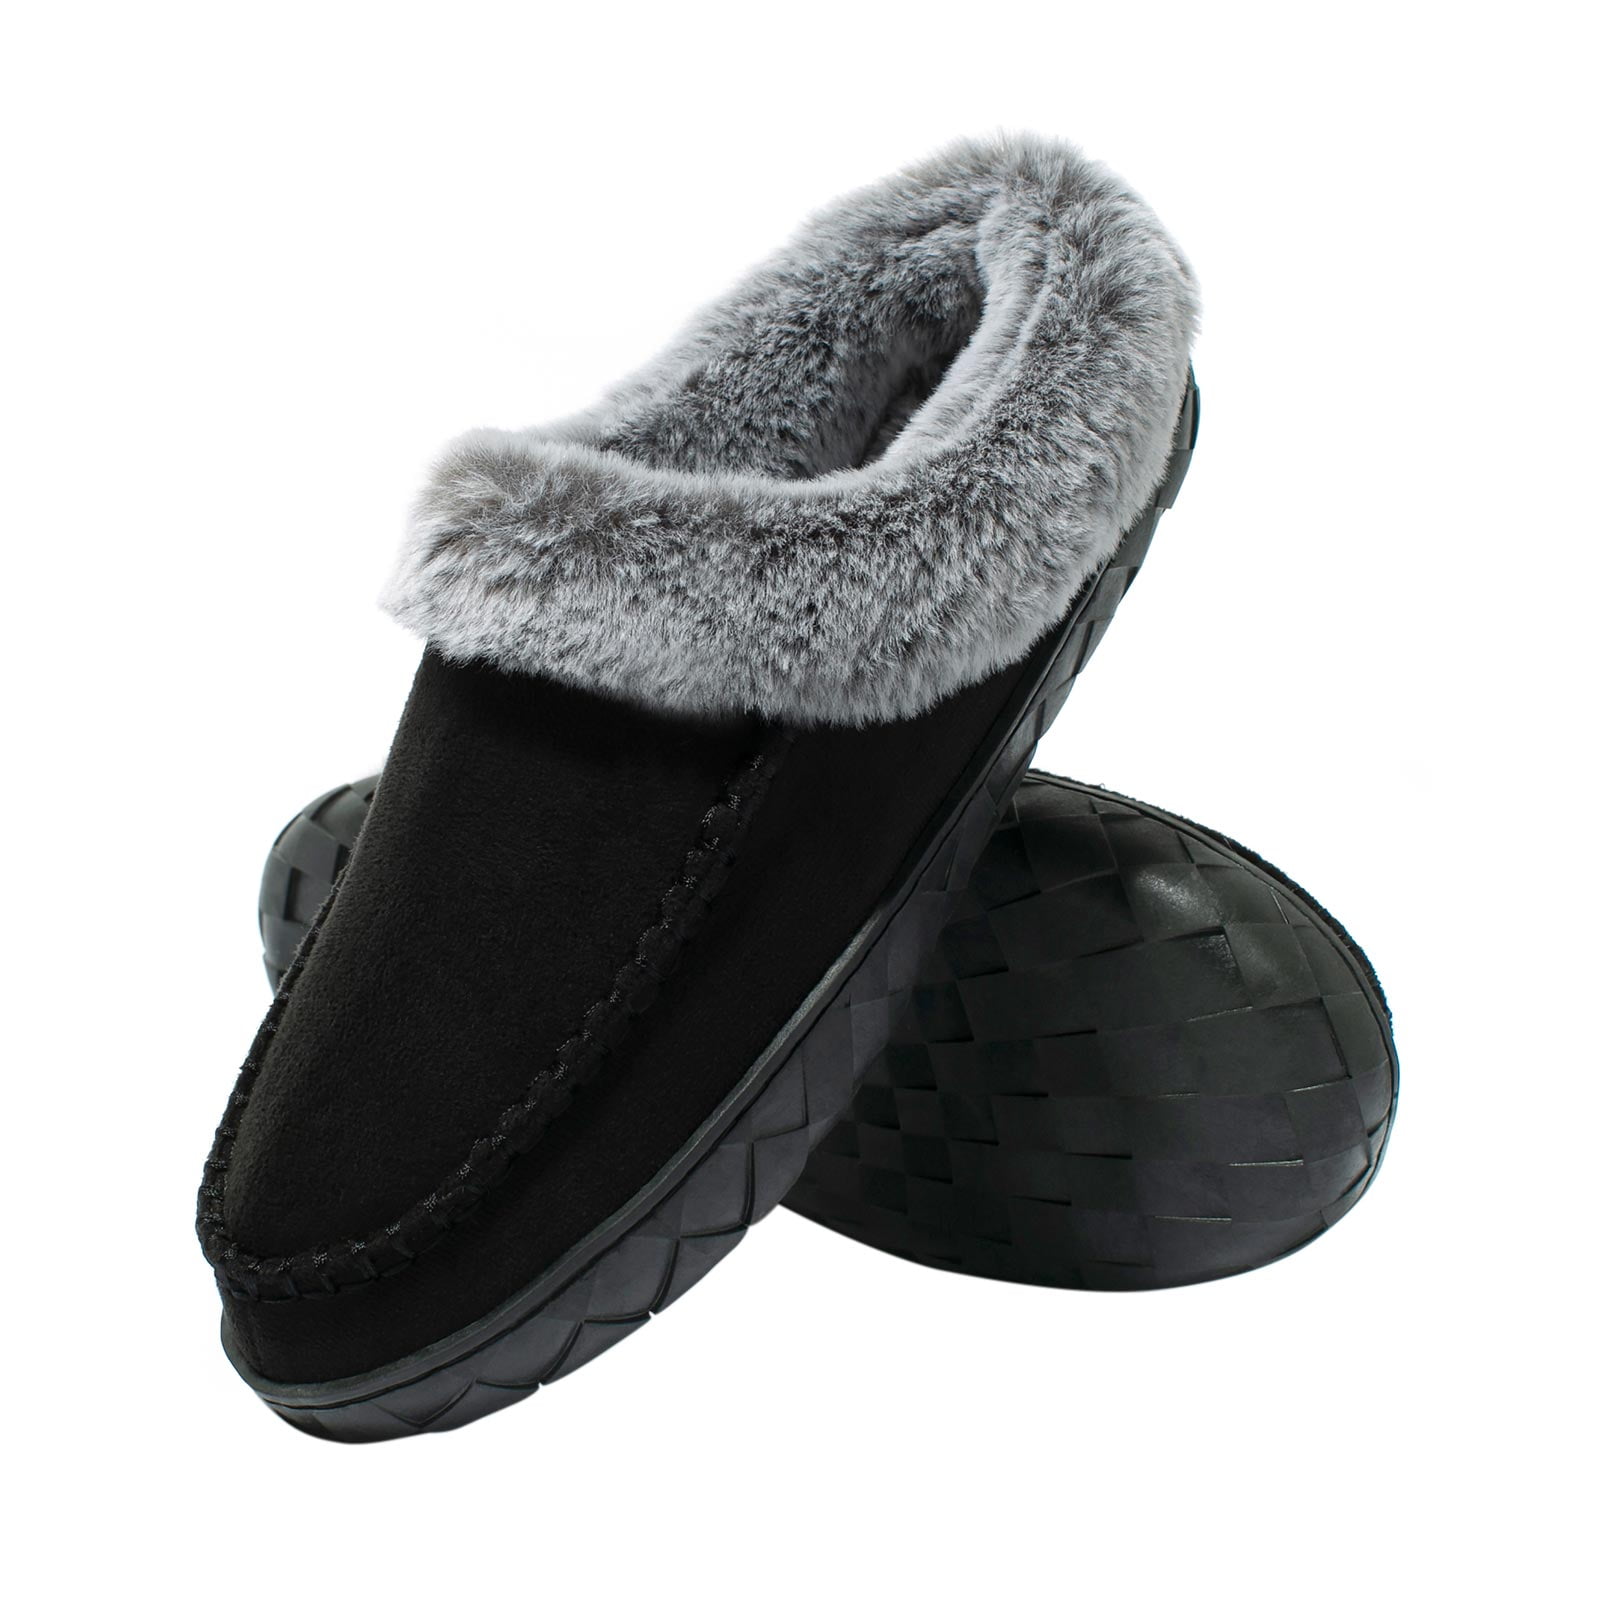 DL Women's Cute Knit Slippers with Faux Fur Lining Memory Foam Slip on House Slippers with Anti-Skid Rubber Sole 